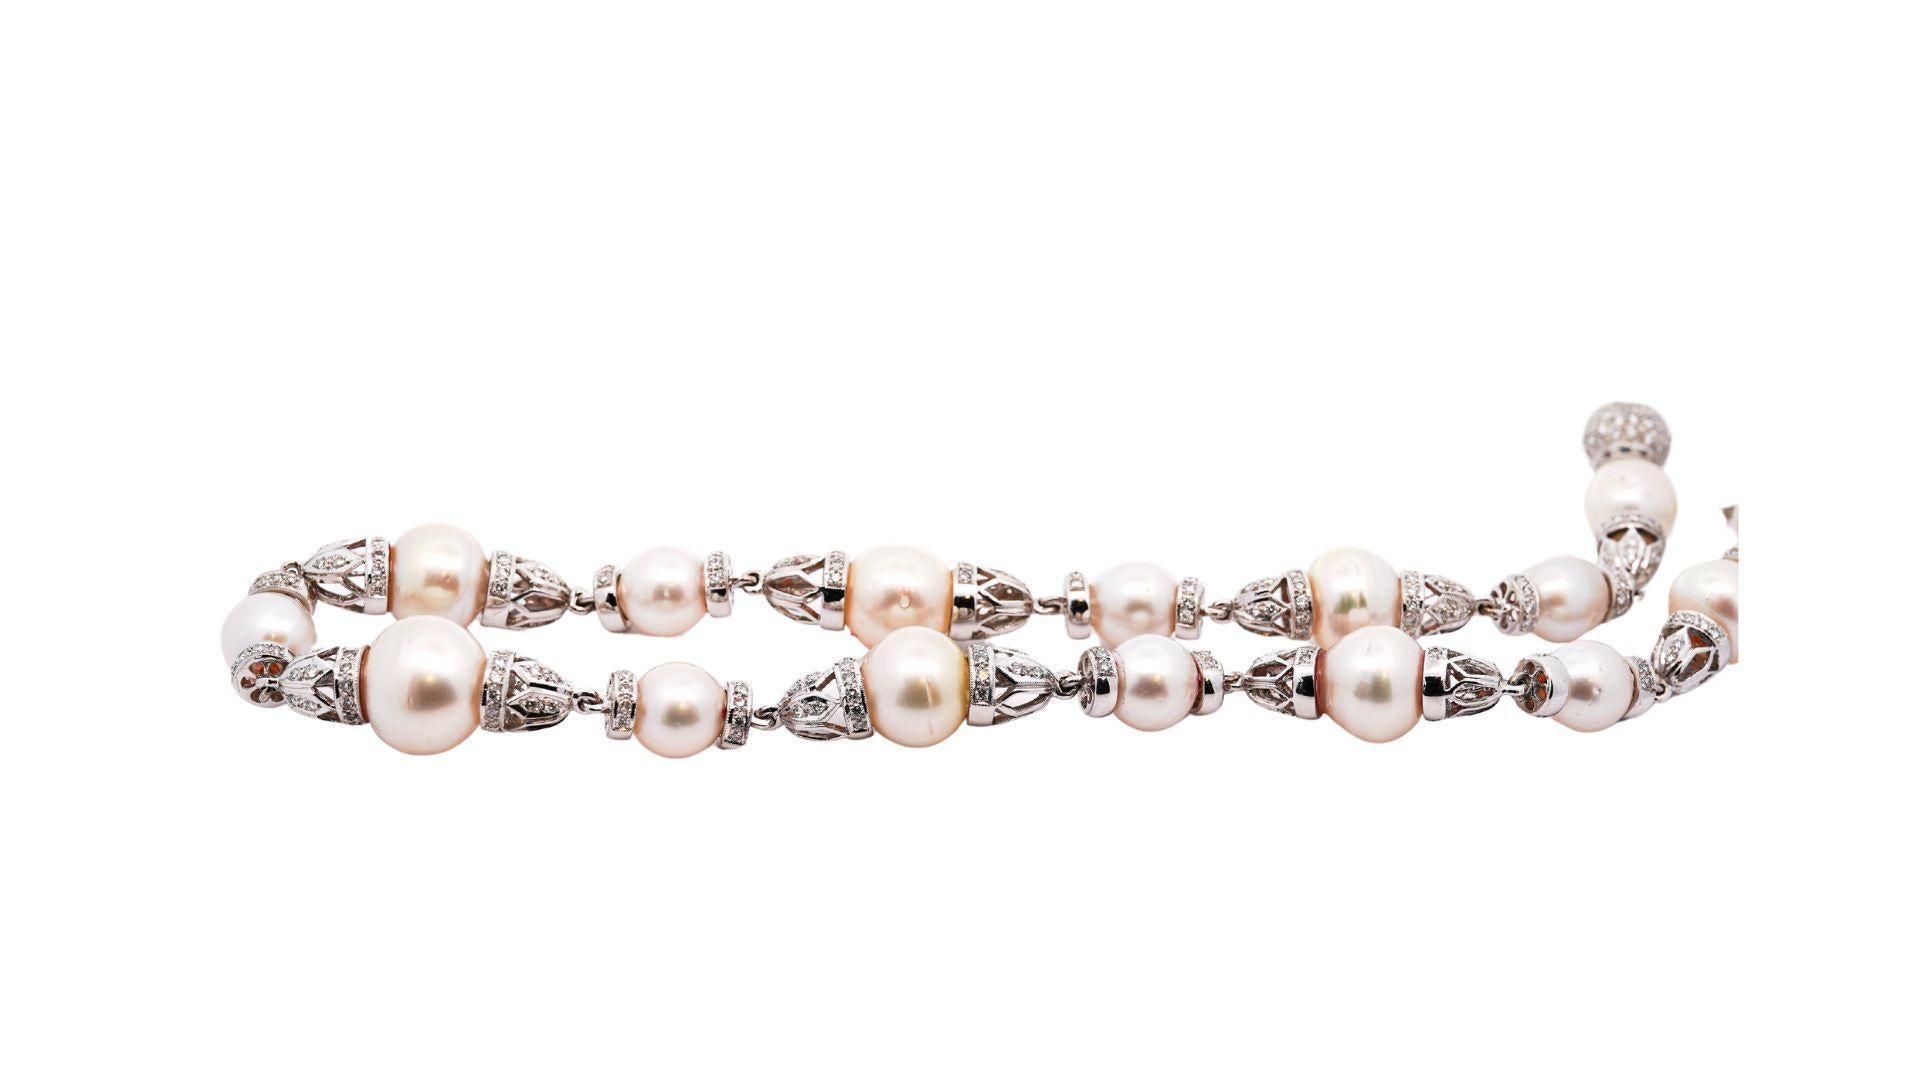 Cultured South Sea Pearls and Diamond Necklace in 18k white gold. Featuring a diamond-encrusted box closure and cone shaped links that connect the pearls. The pearls bear moderate blemishes, excellent luster, and good uniformity. This is a piece